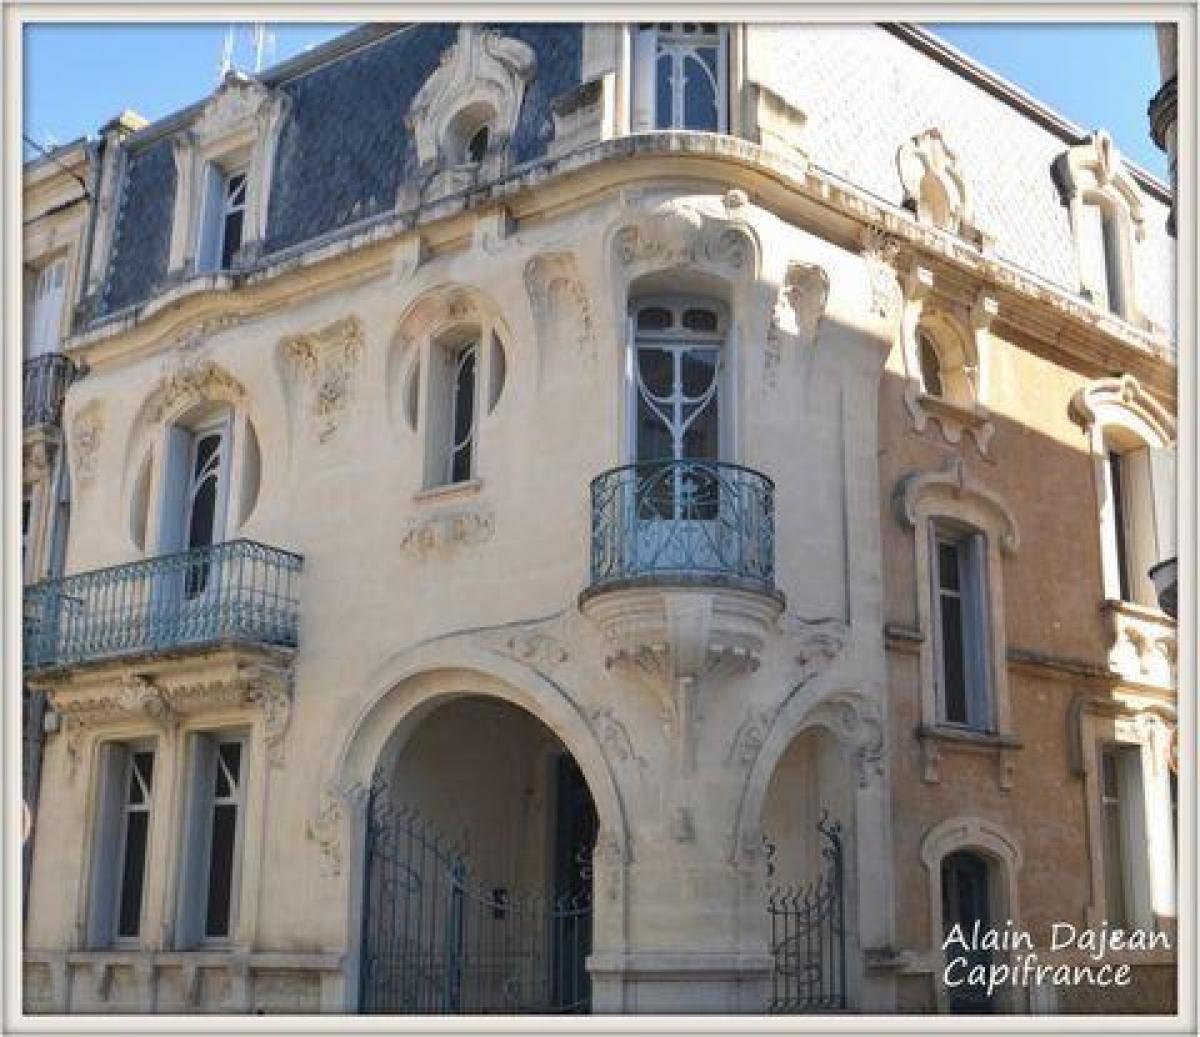 Picture of Condo For Sale in Agen, Aquitaine, France